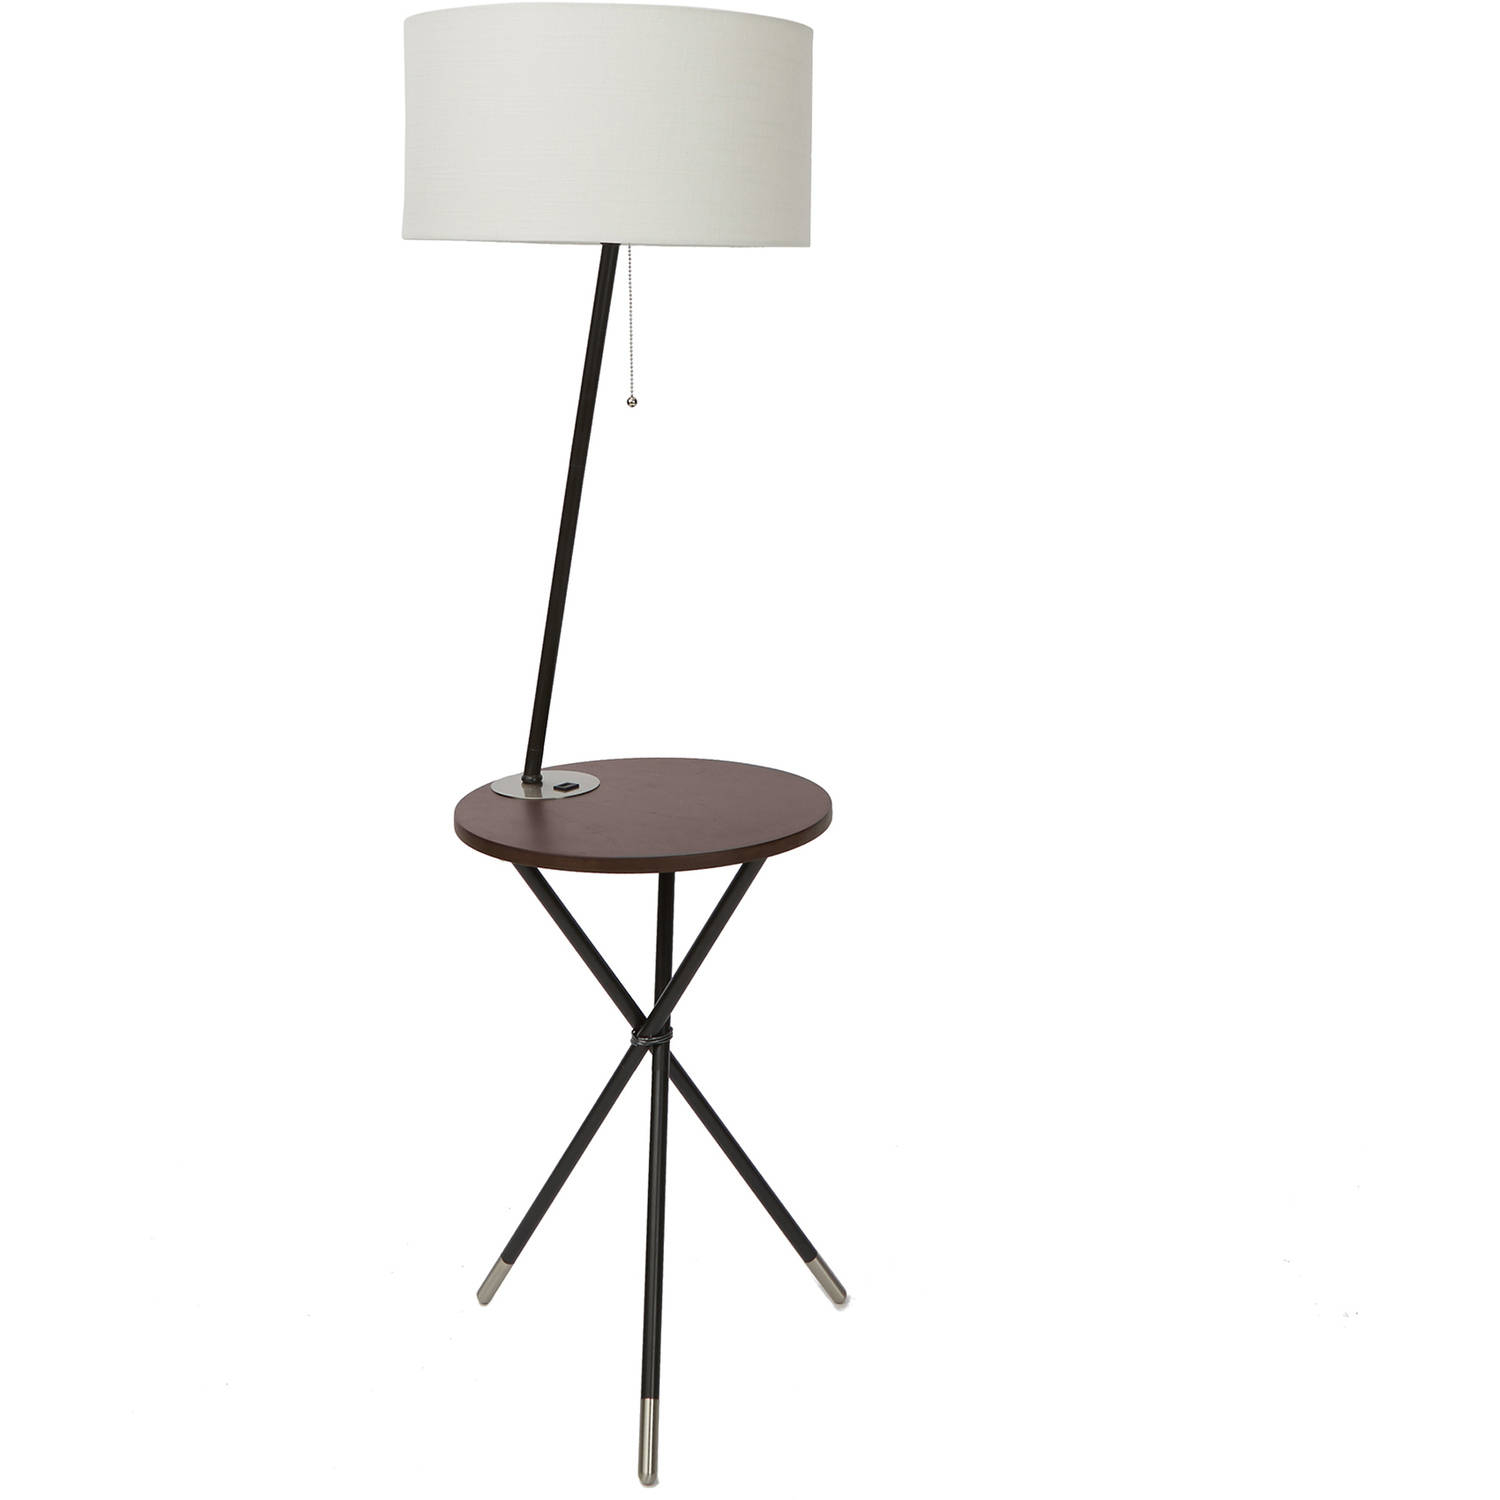 Better Homes And Gardens Quot Tripod End Table Floor Lamp regarding size 1500 X 1500